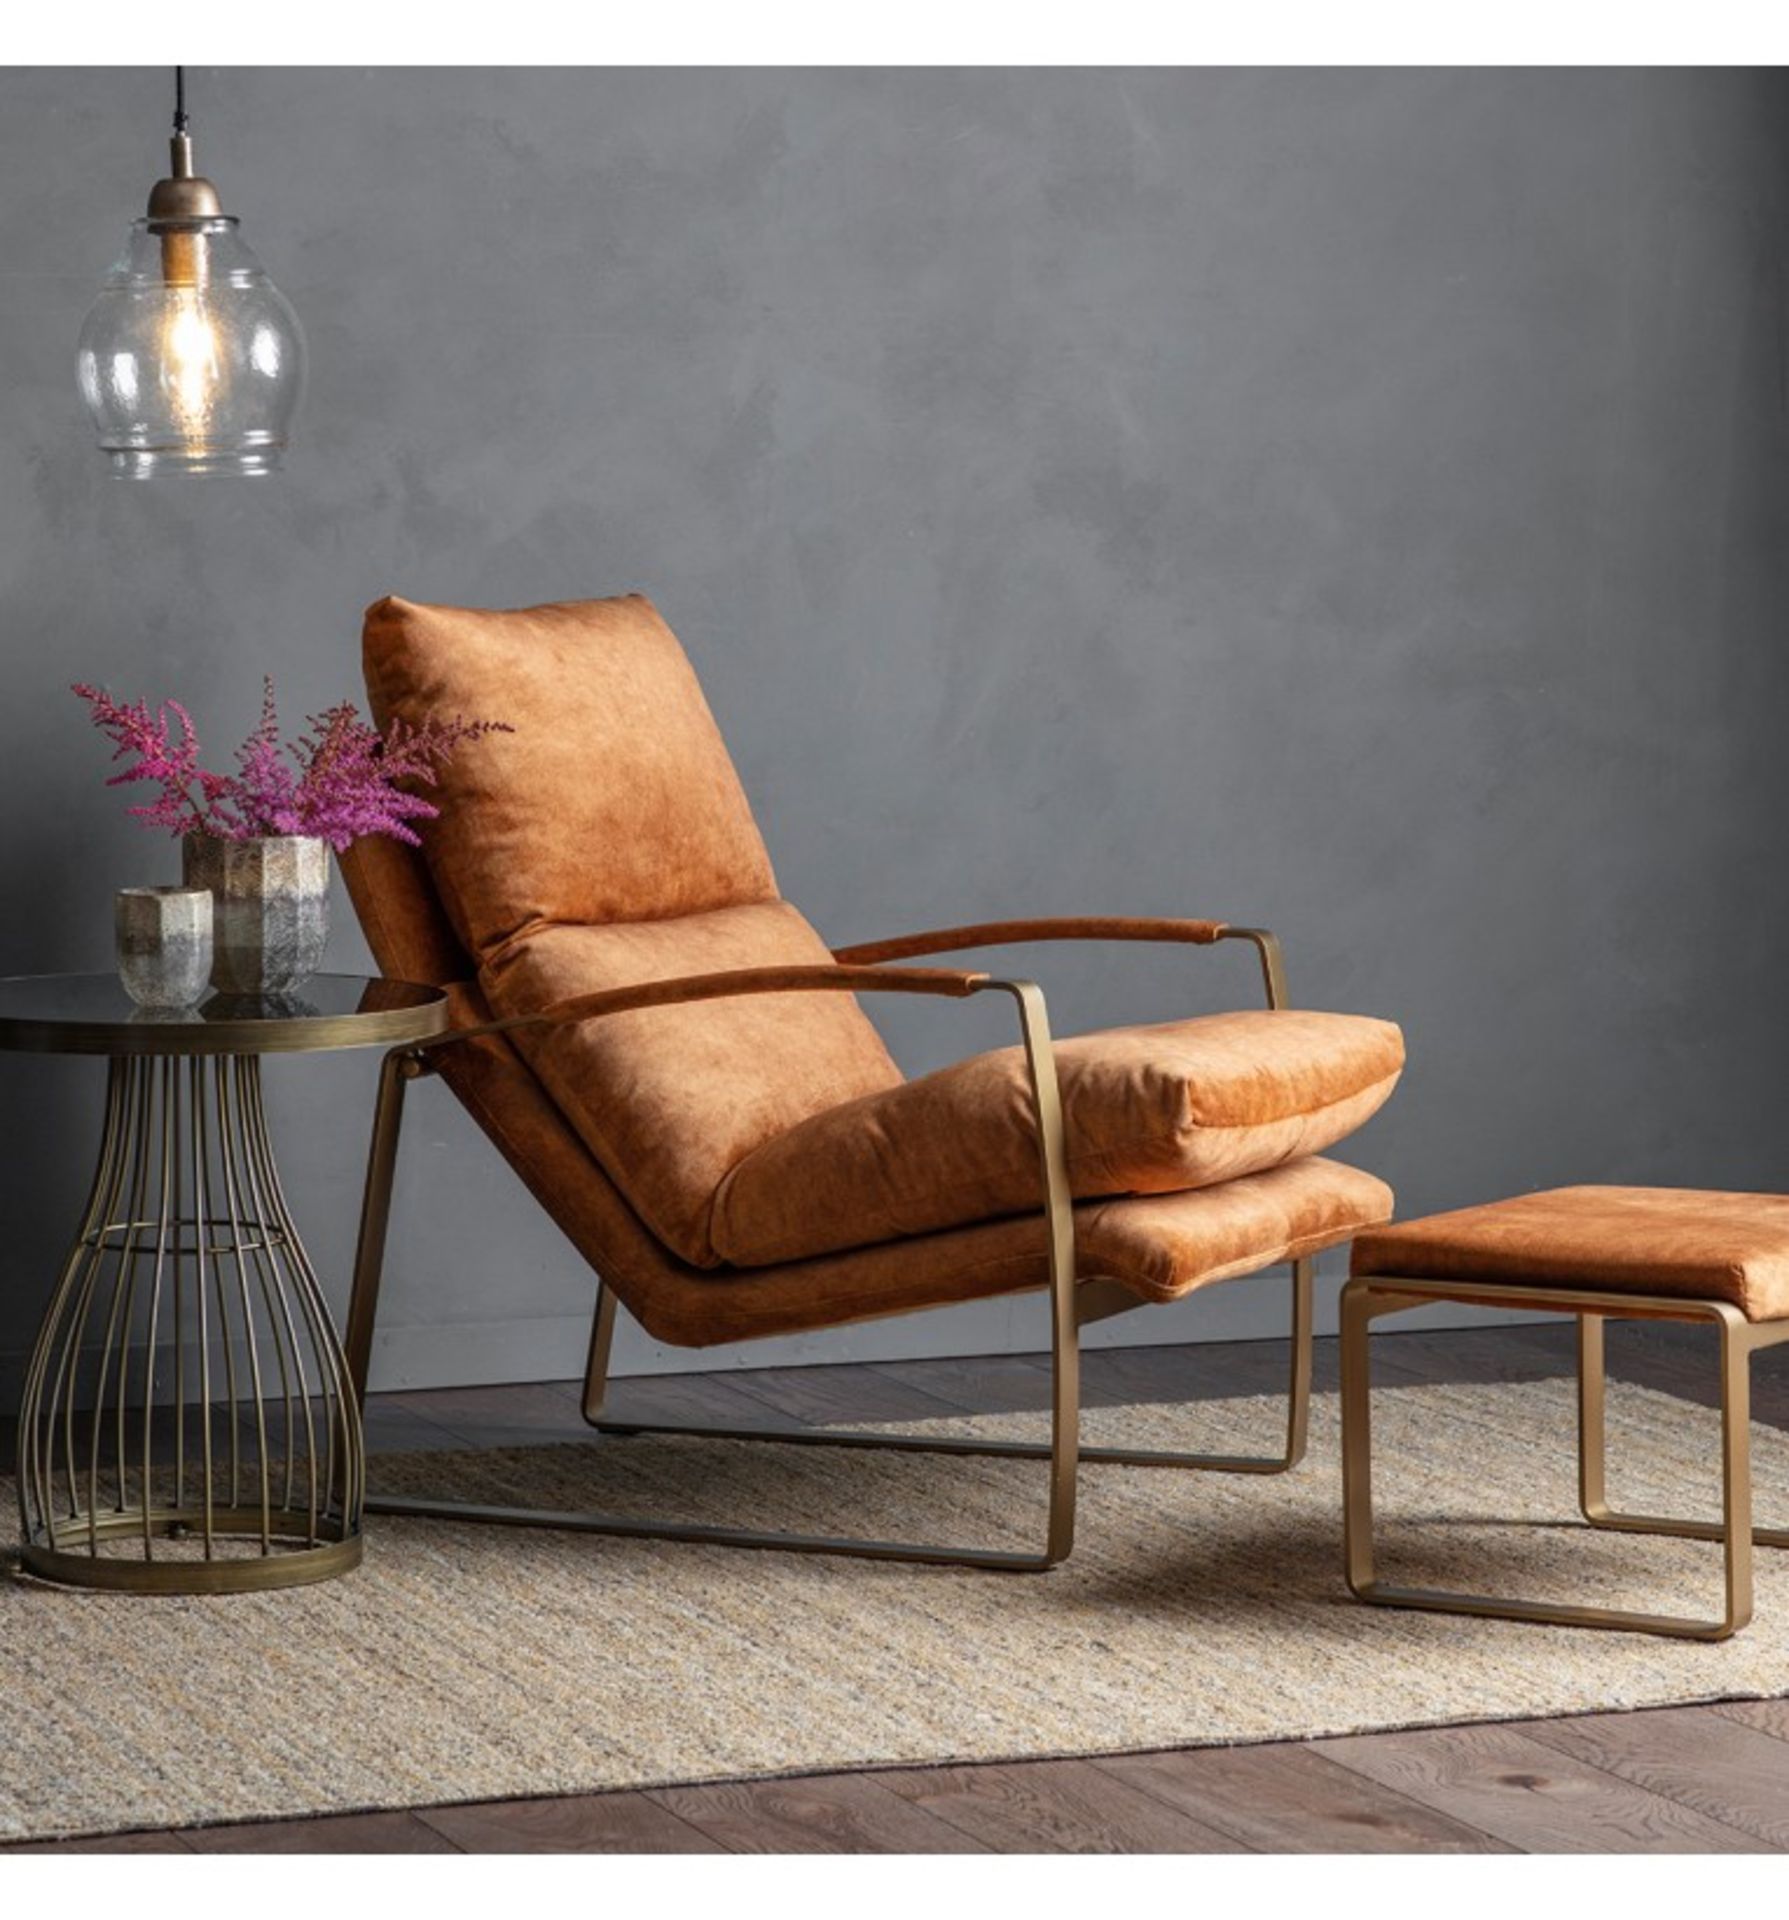 Fabien Lounger Ochre This lounger has a brass matt finished metal frame and a sumptuous suede